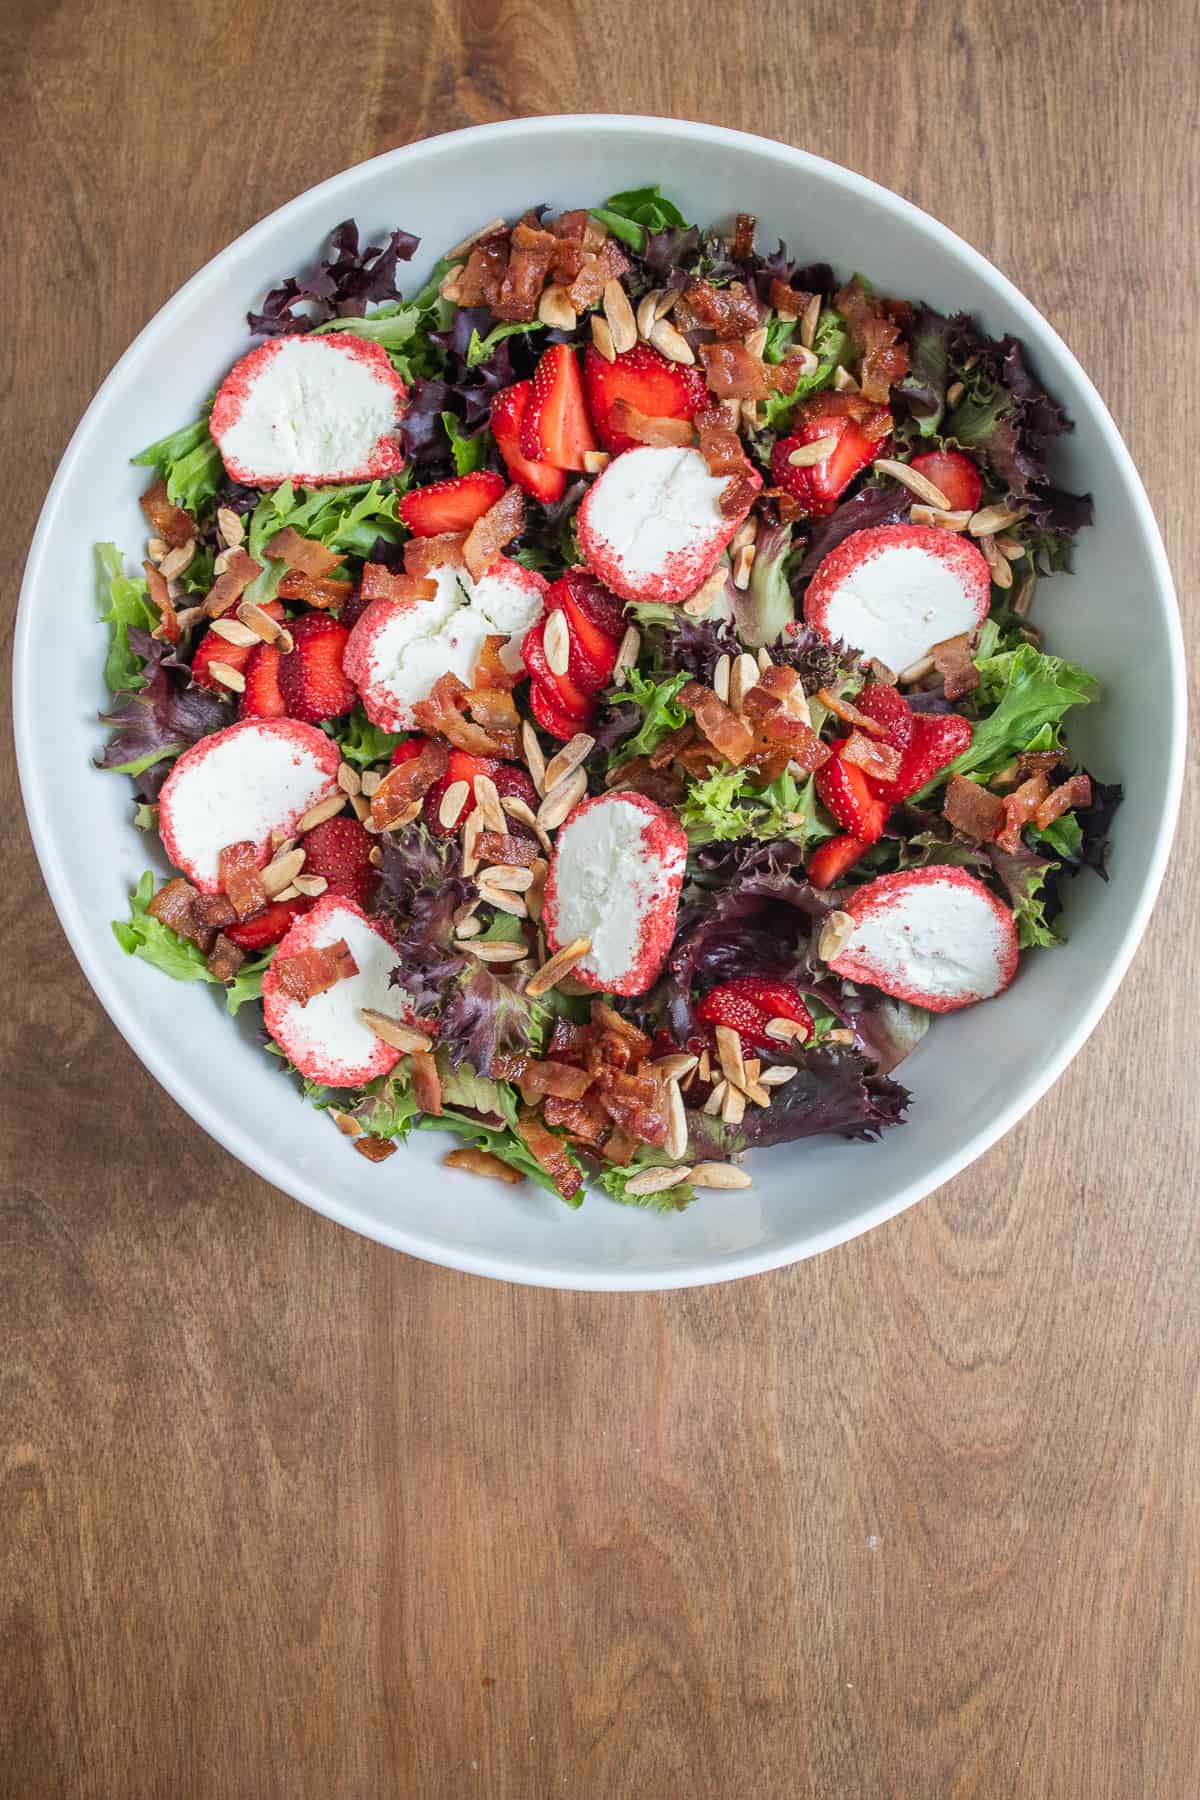 Mixed greens, almonds, bacon, strawberries, and strawberry-coated goat cheese are layered in a large white bowl.